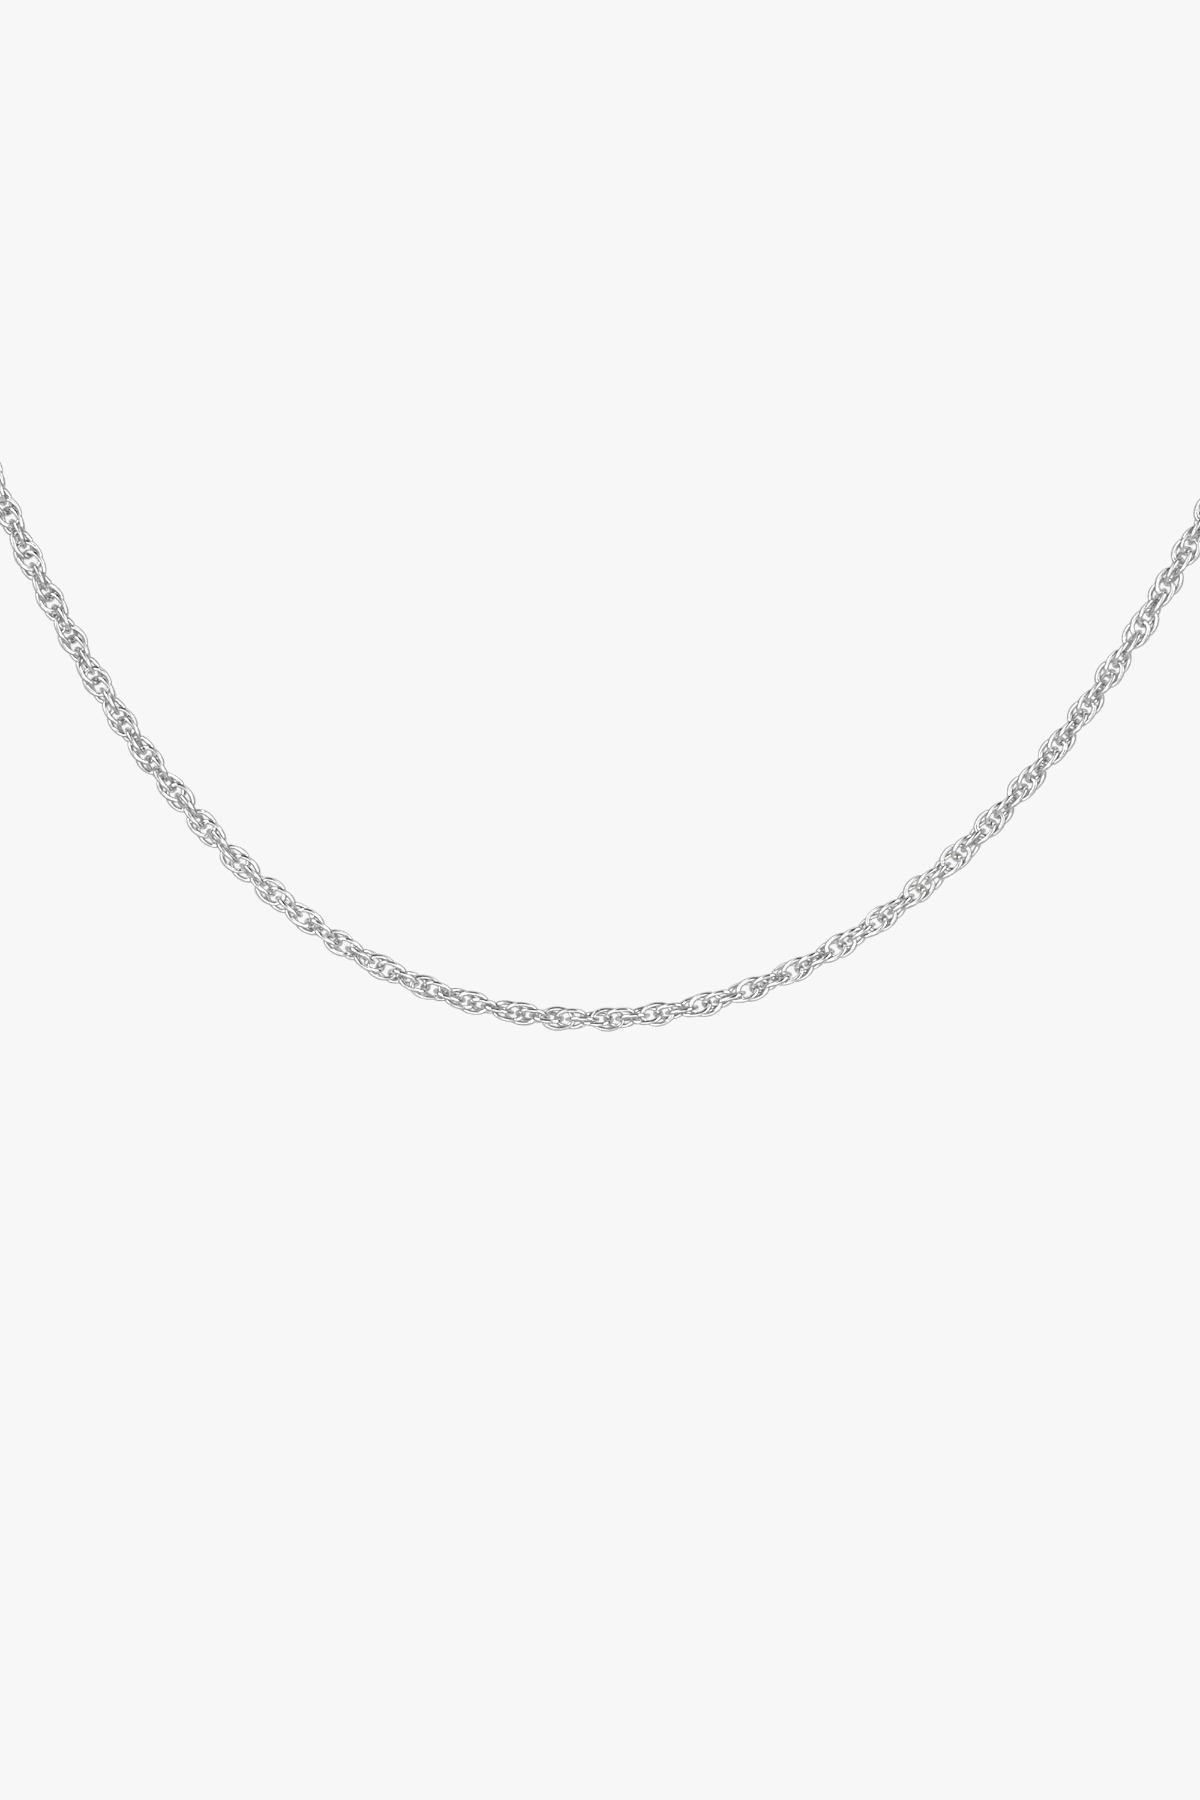 wildthings collectables - Rope chain necklace silver 45cm 4